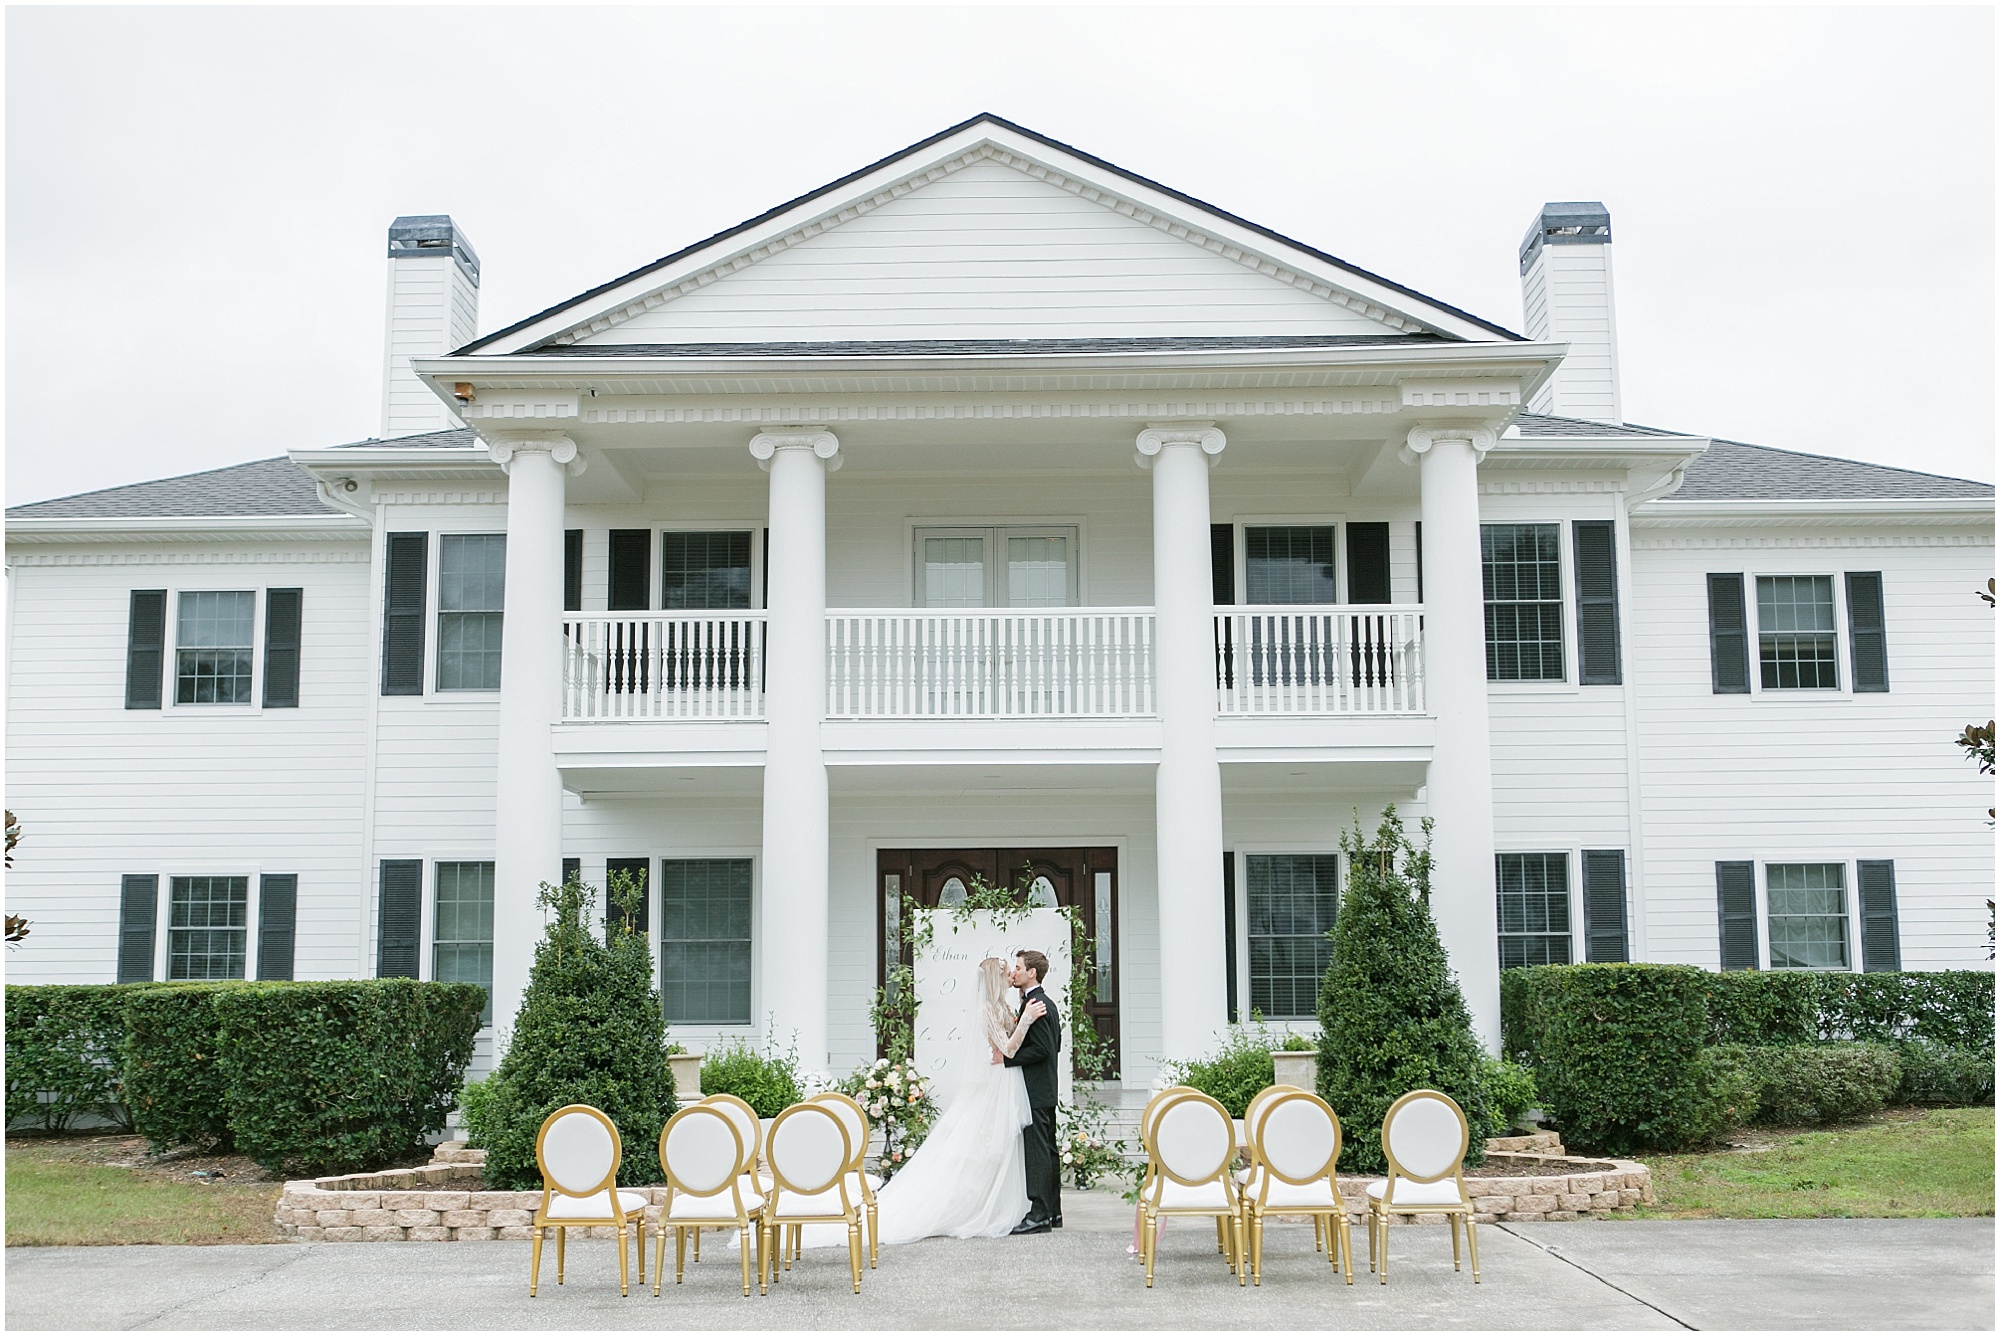 Top Five Central Florida Wedding Venues fourth place location of the 2-story southern estate, Arundel Estate.